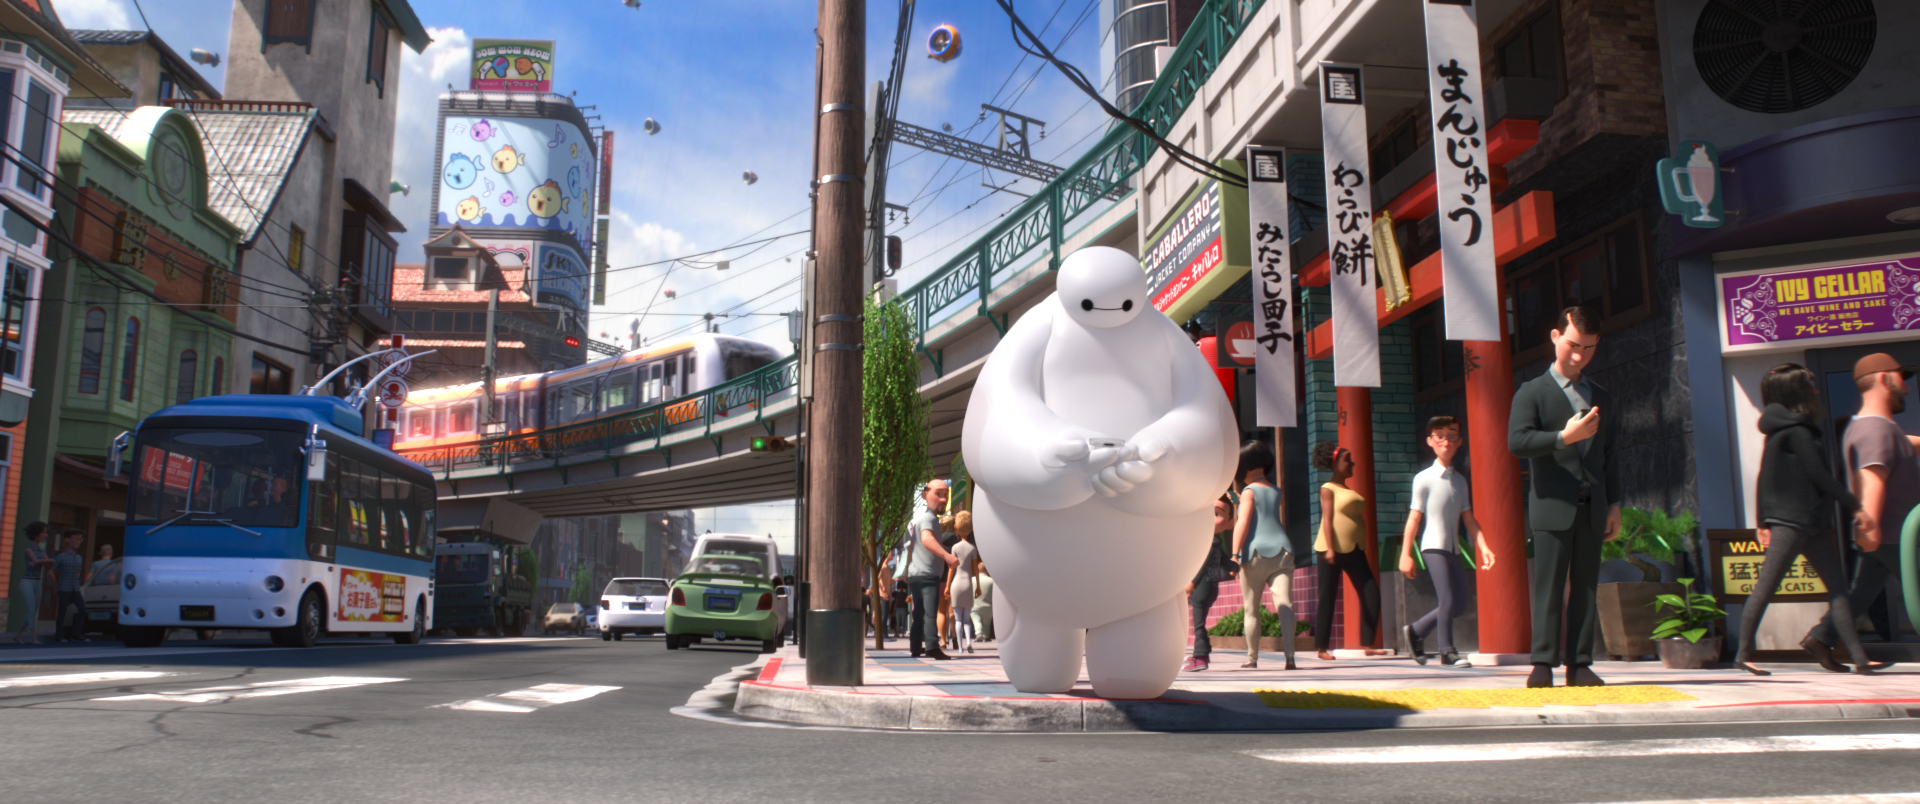 I’m Hank Driskill, Tech Supervisor Of Big Hero 6, And This Is How I Work